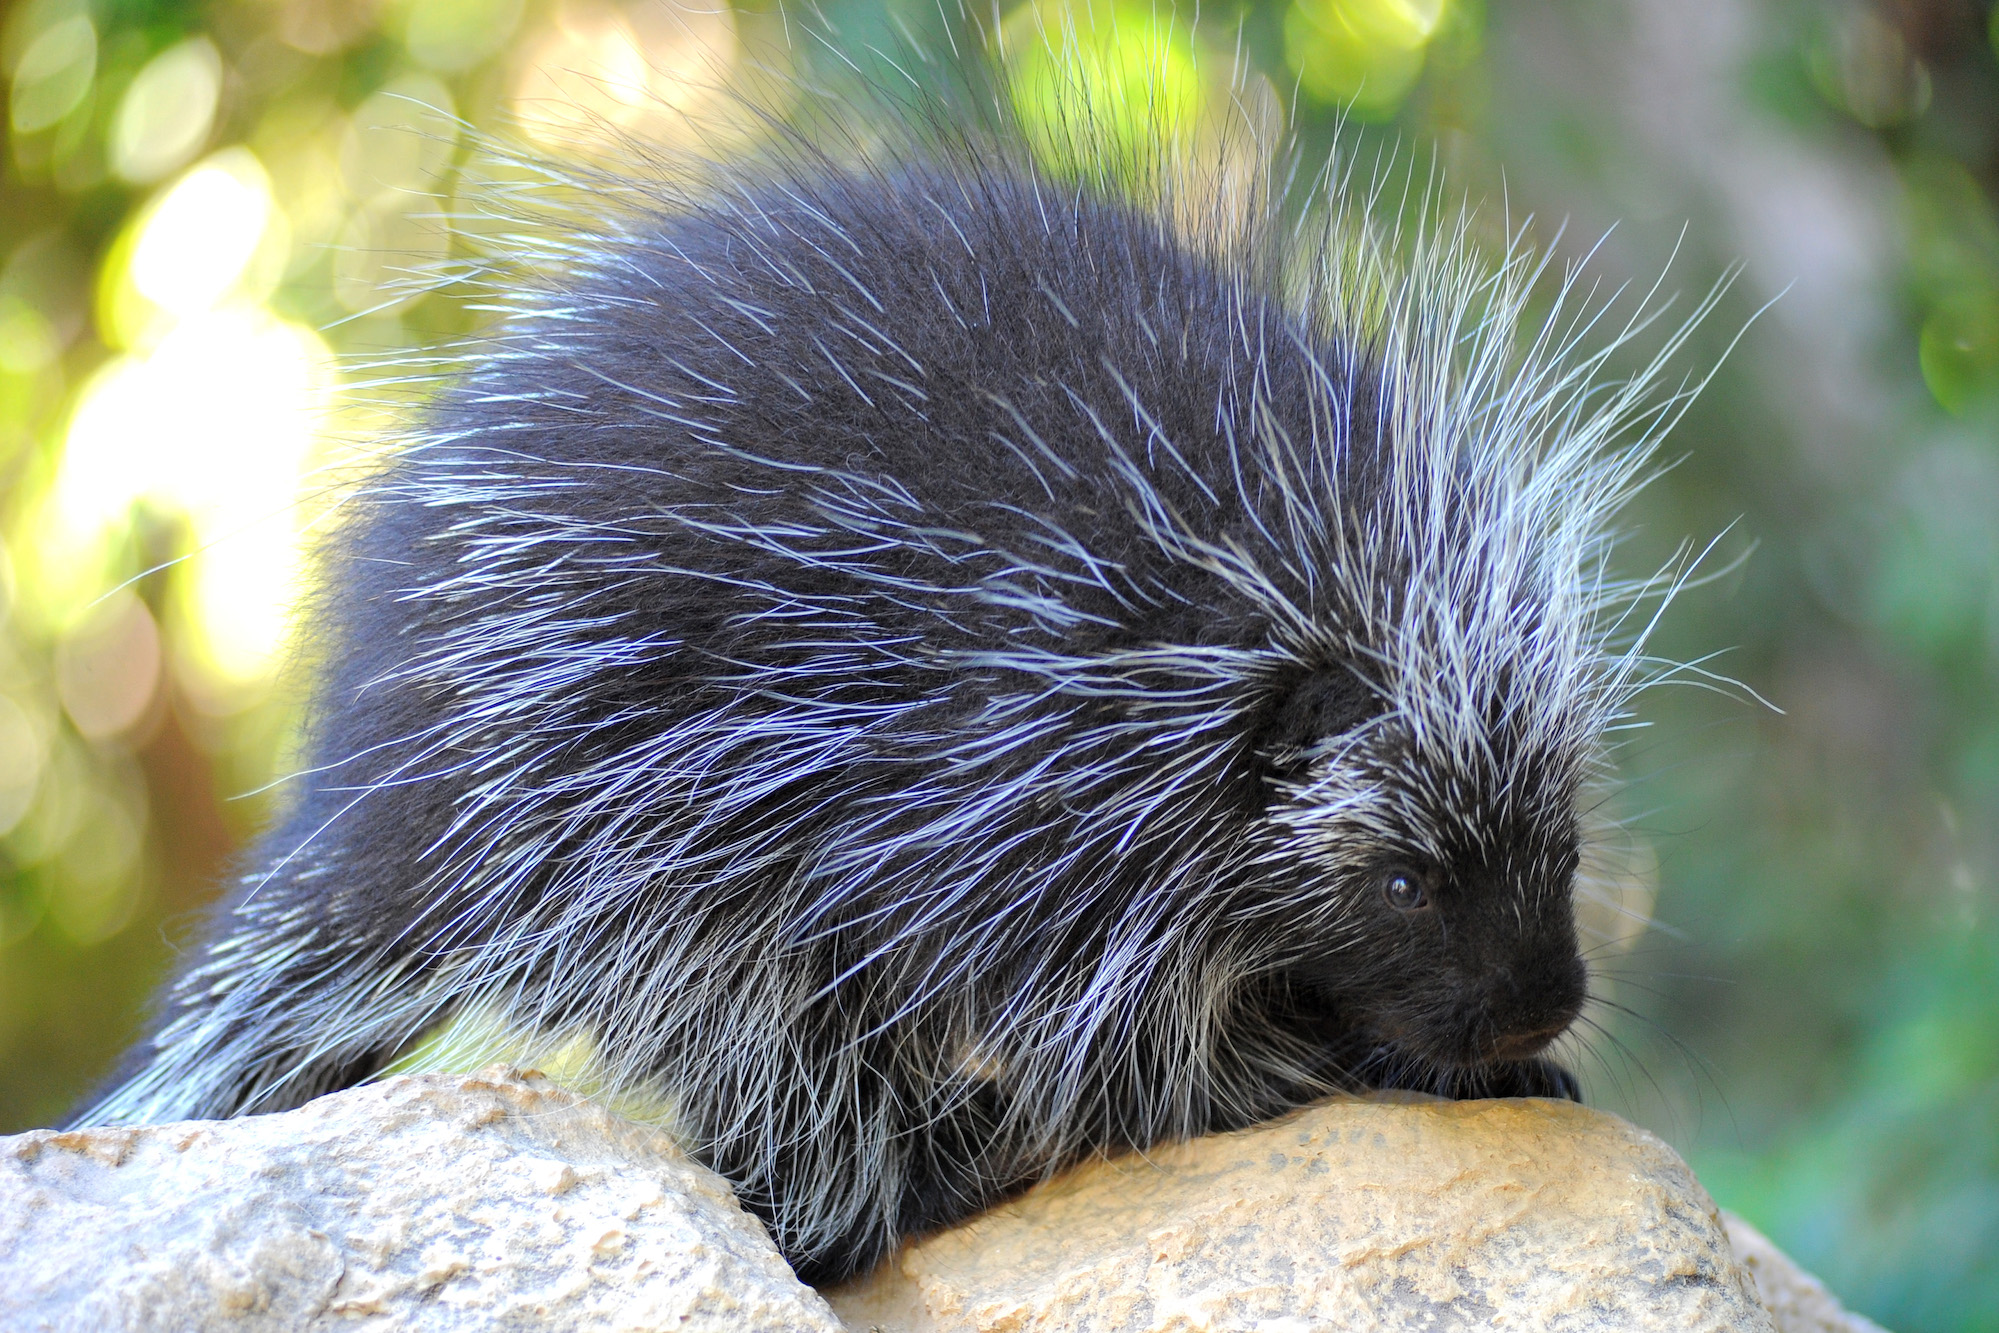 Betty the Porcupine at the Wildlife Learning Center.